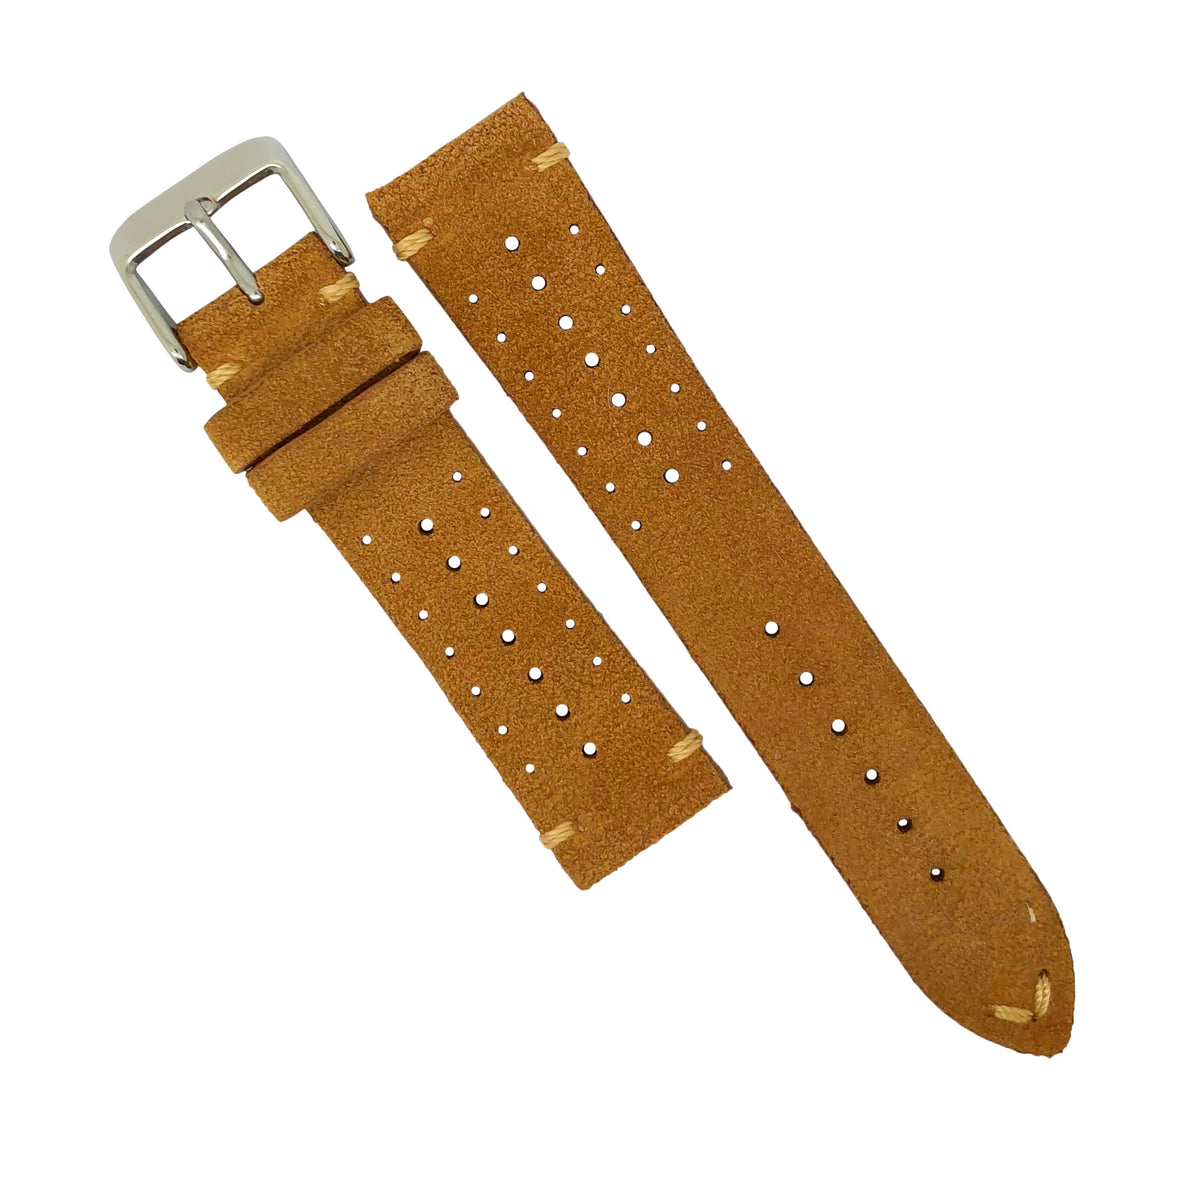 Premium Rally Suede Leather Watch Strap in Tan (20mm) - Nomad Watch Works Malaysia